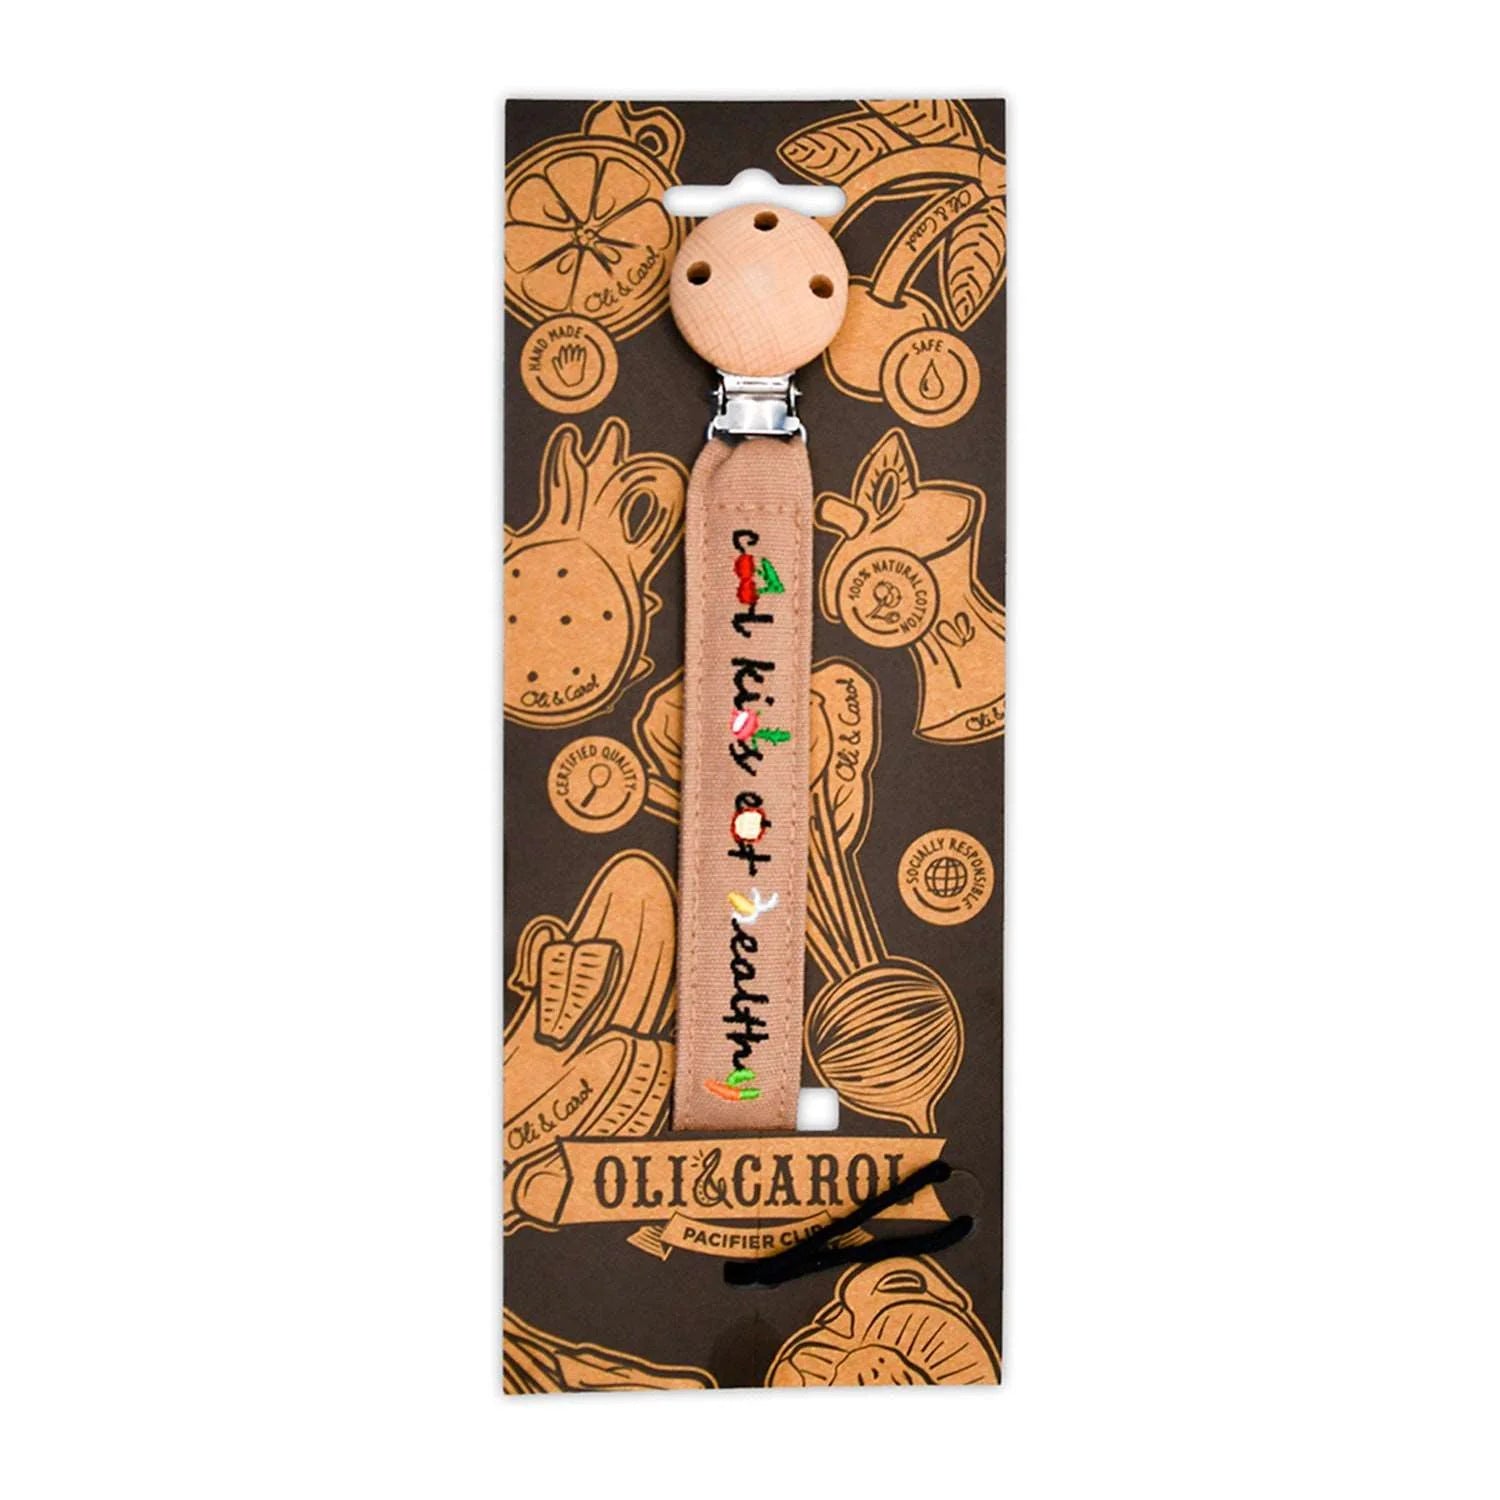 Toys Games and Puzzles Oli & Carol Pacifier Clip by Weirs of Baggot Street